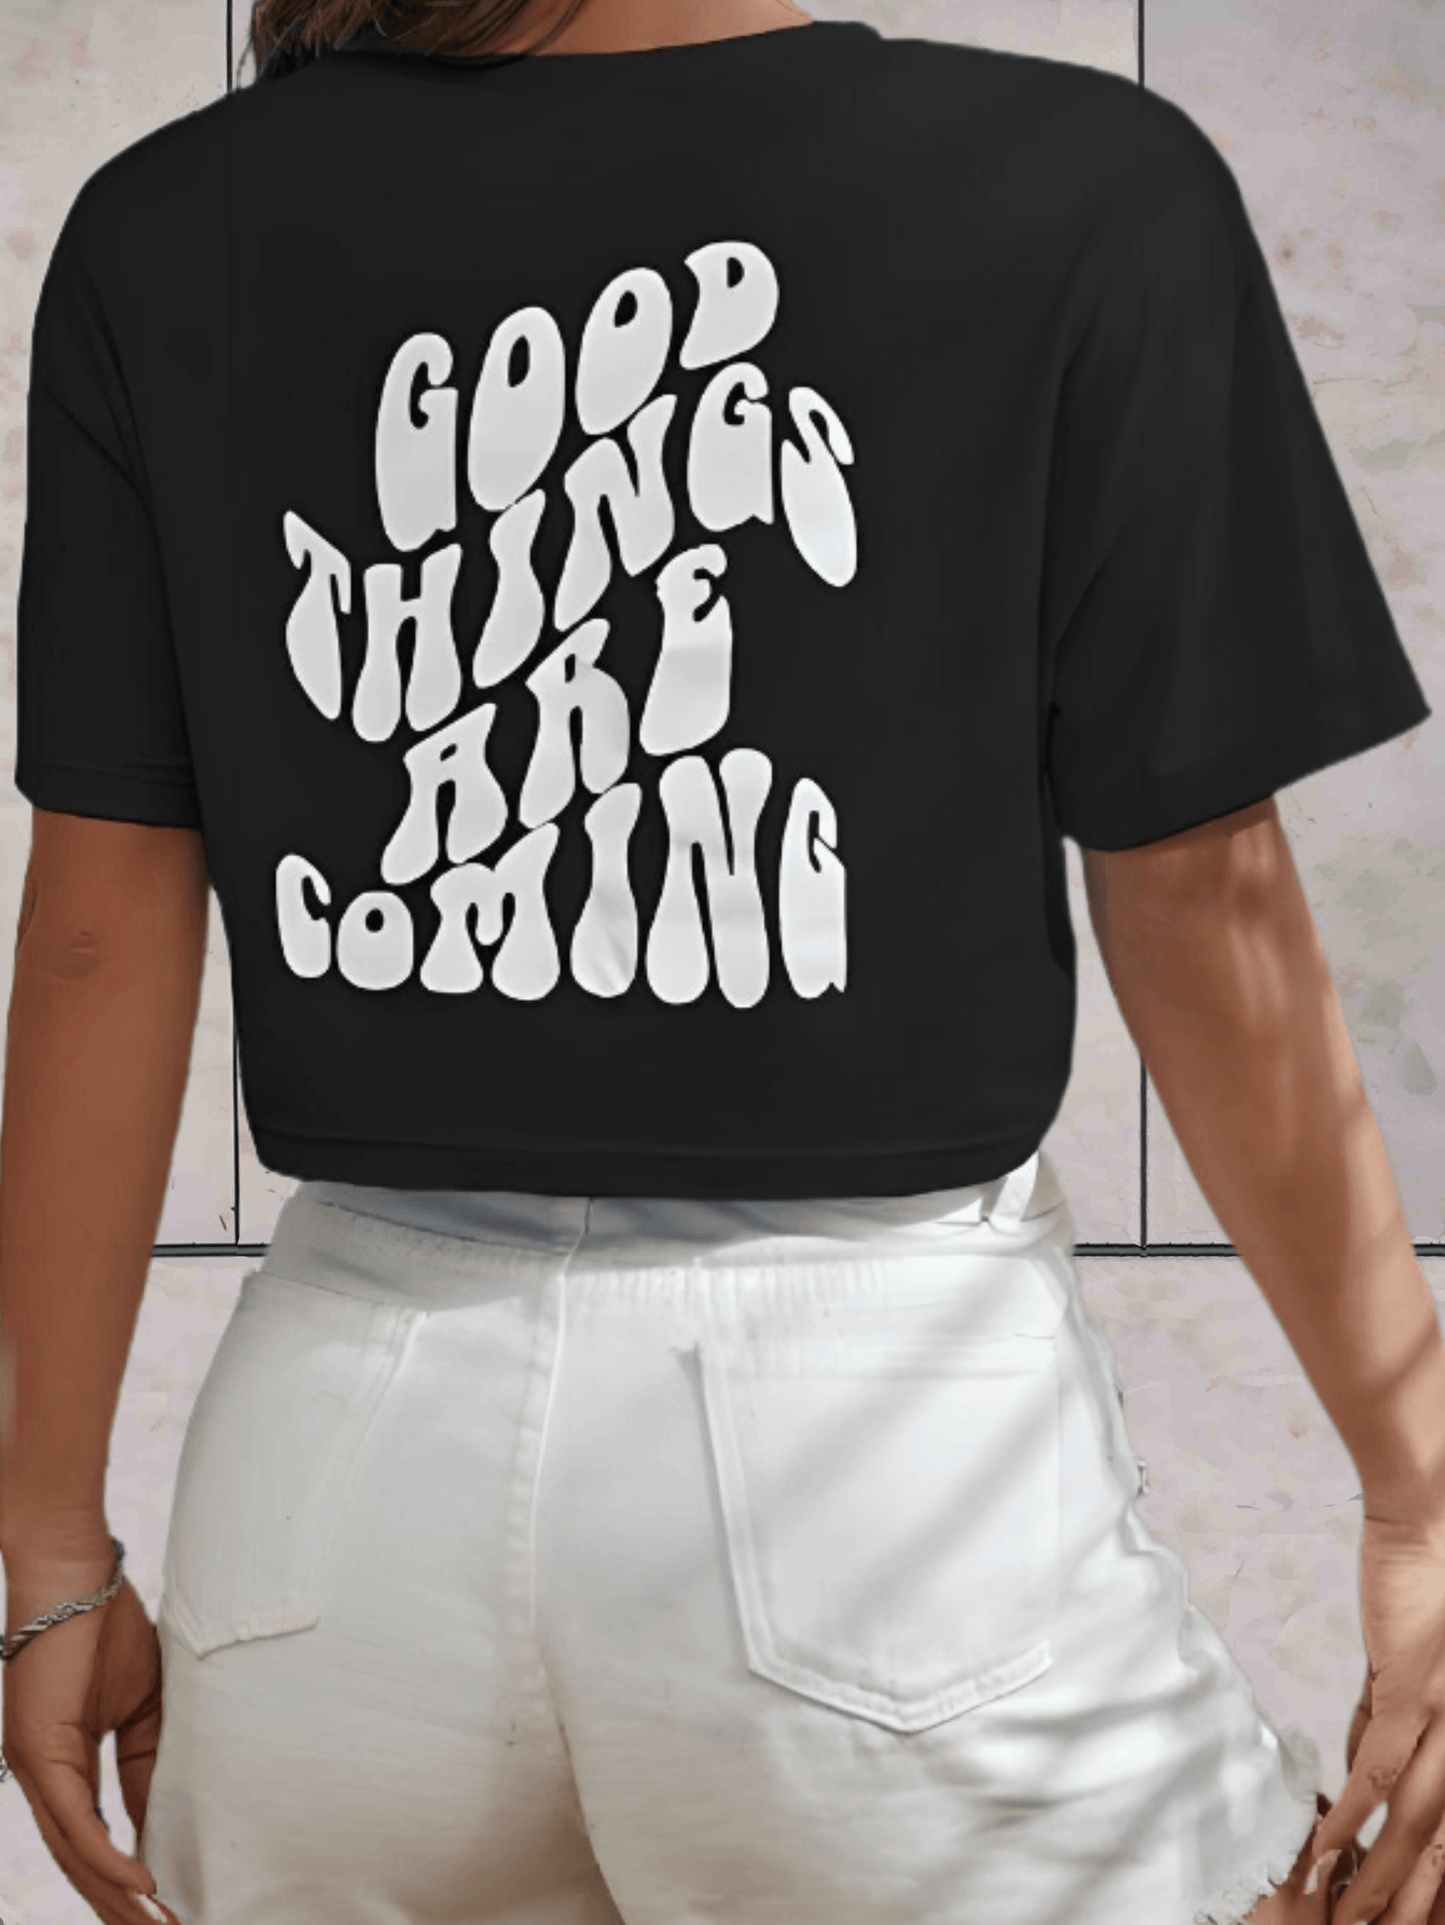 Cleofe - Crop T-Shirt "Good Things Are Coming" - Sky-Sense